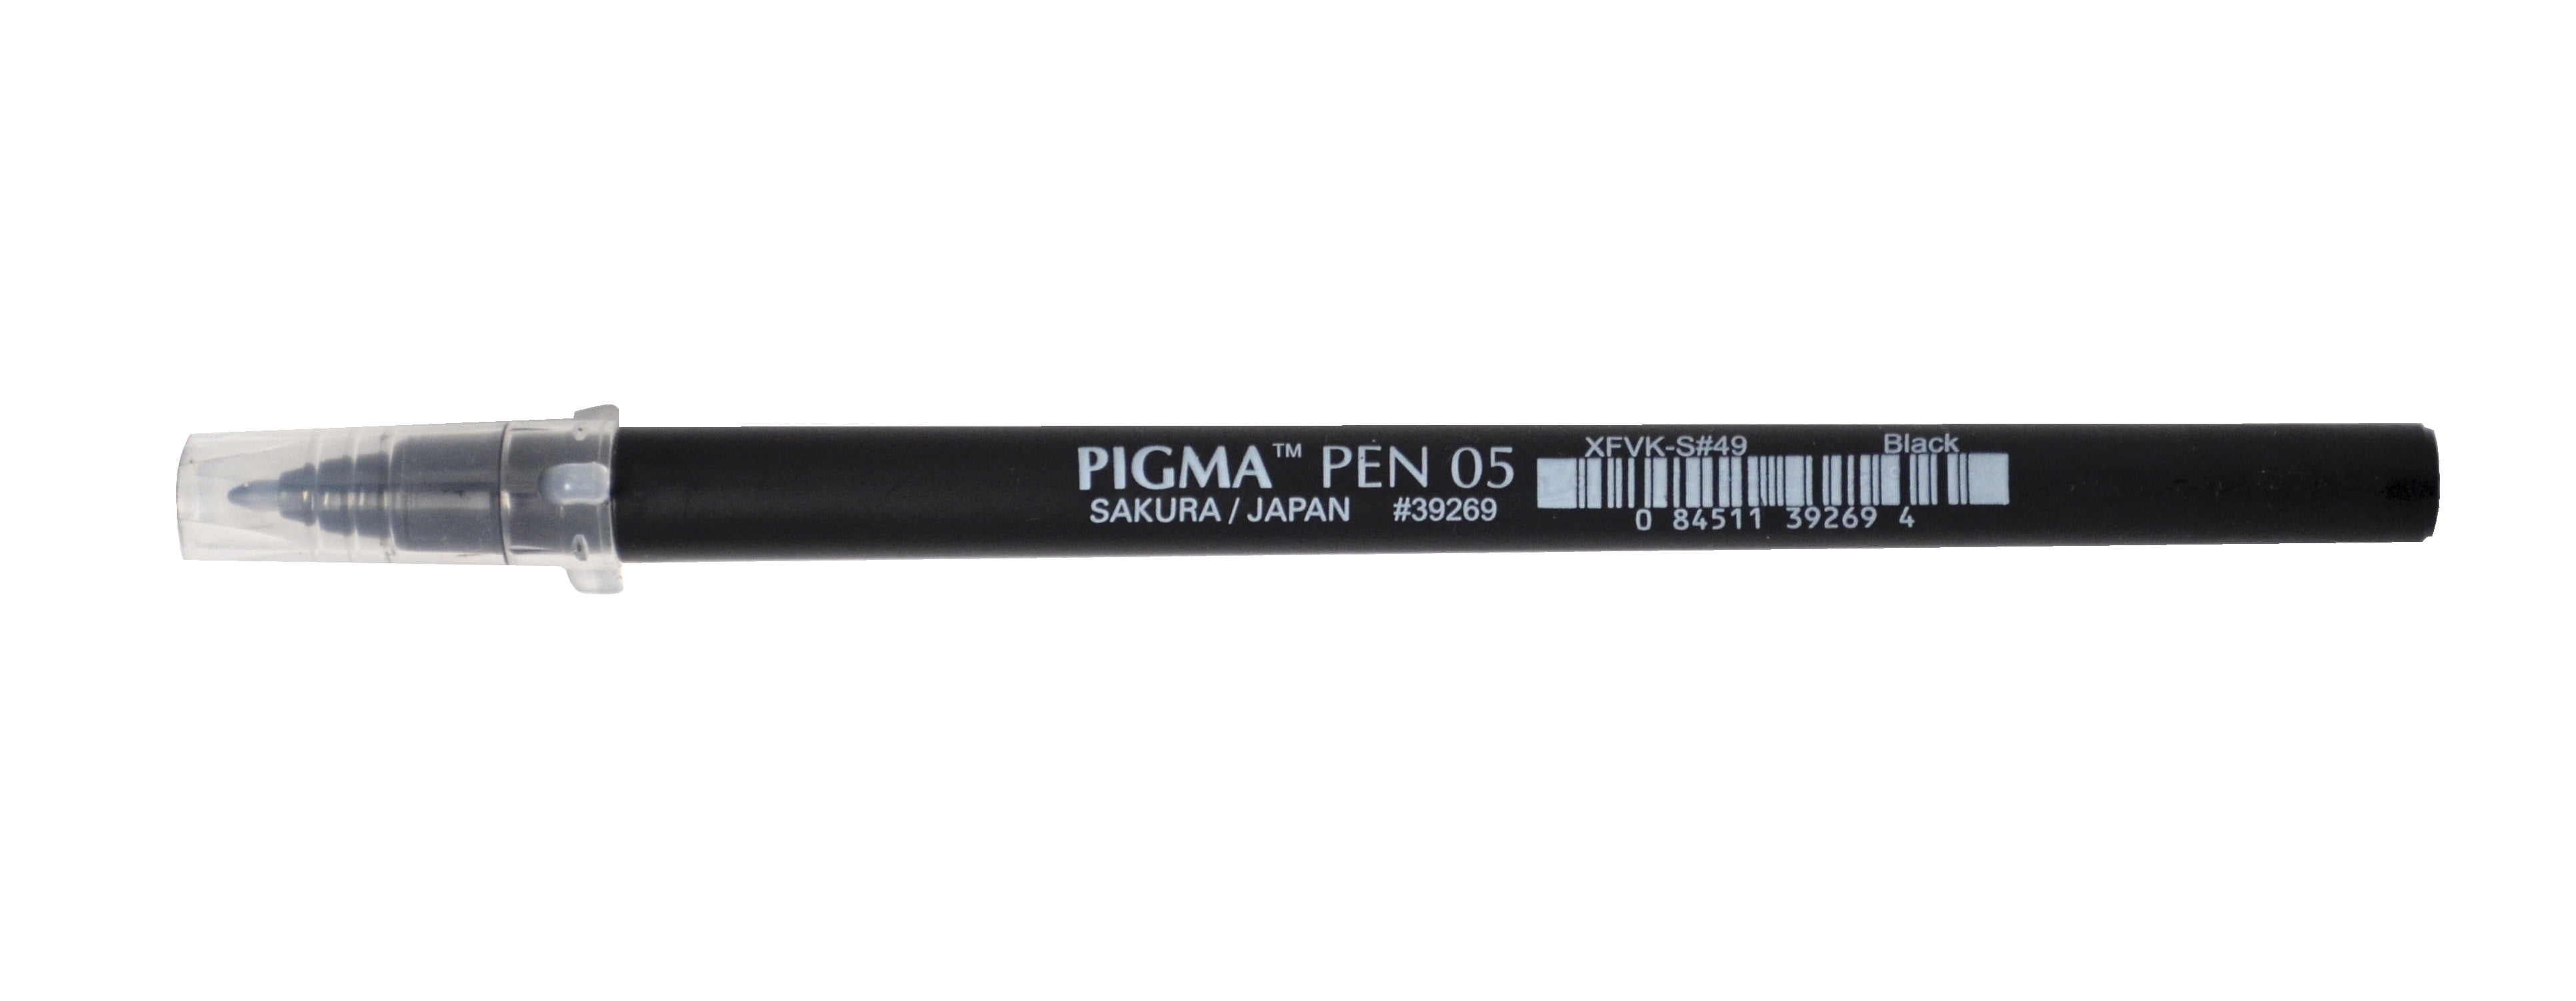 SAKURA Pigma Micron Fineliner Pens - Archival Black and Colored Ink Pens -  Pens for Writing, Drawing, or Journaling - Black and Colored Ink - 05 Point